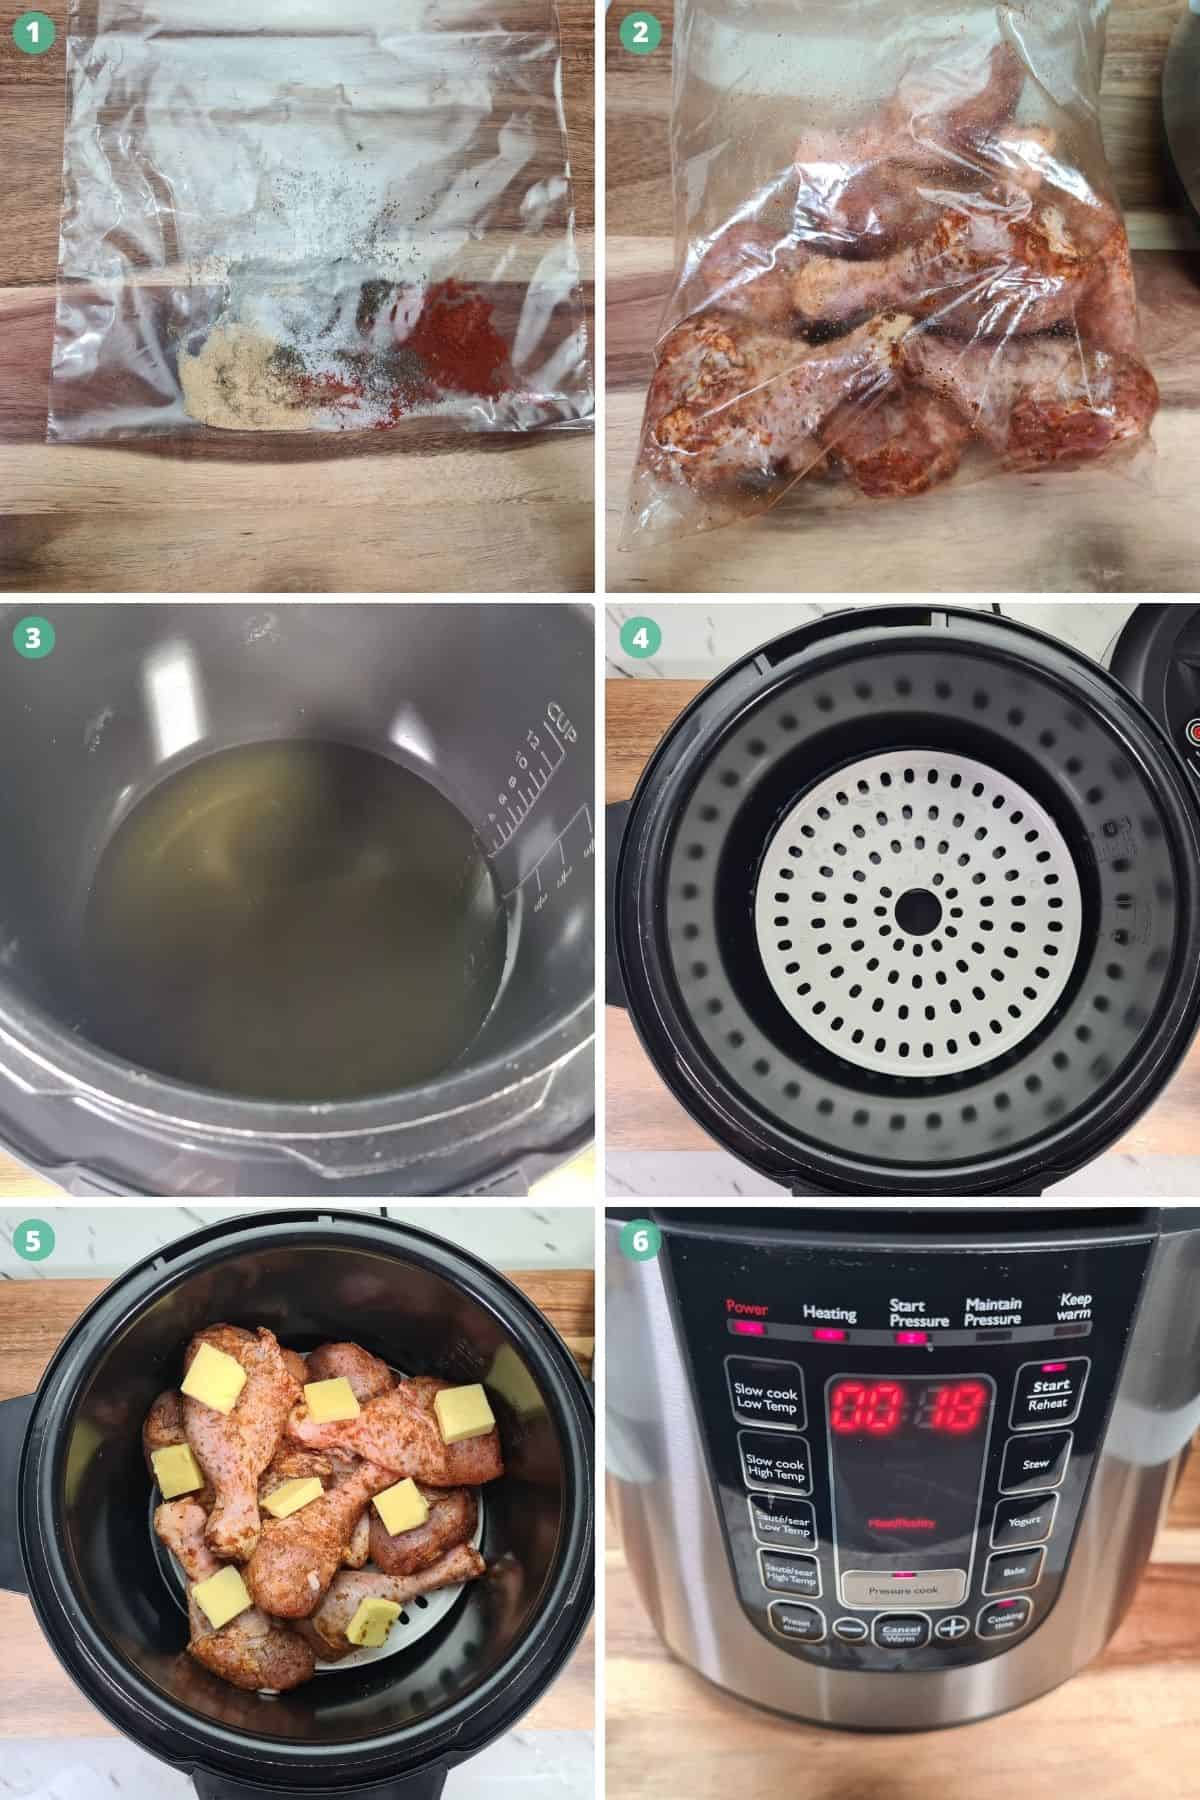 cooking the chicken drumsticks in the pressure cooker